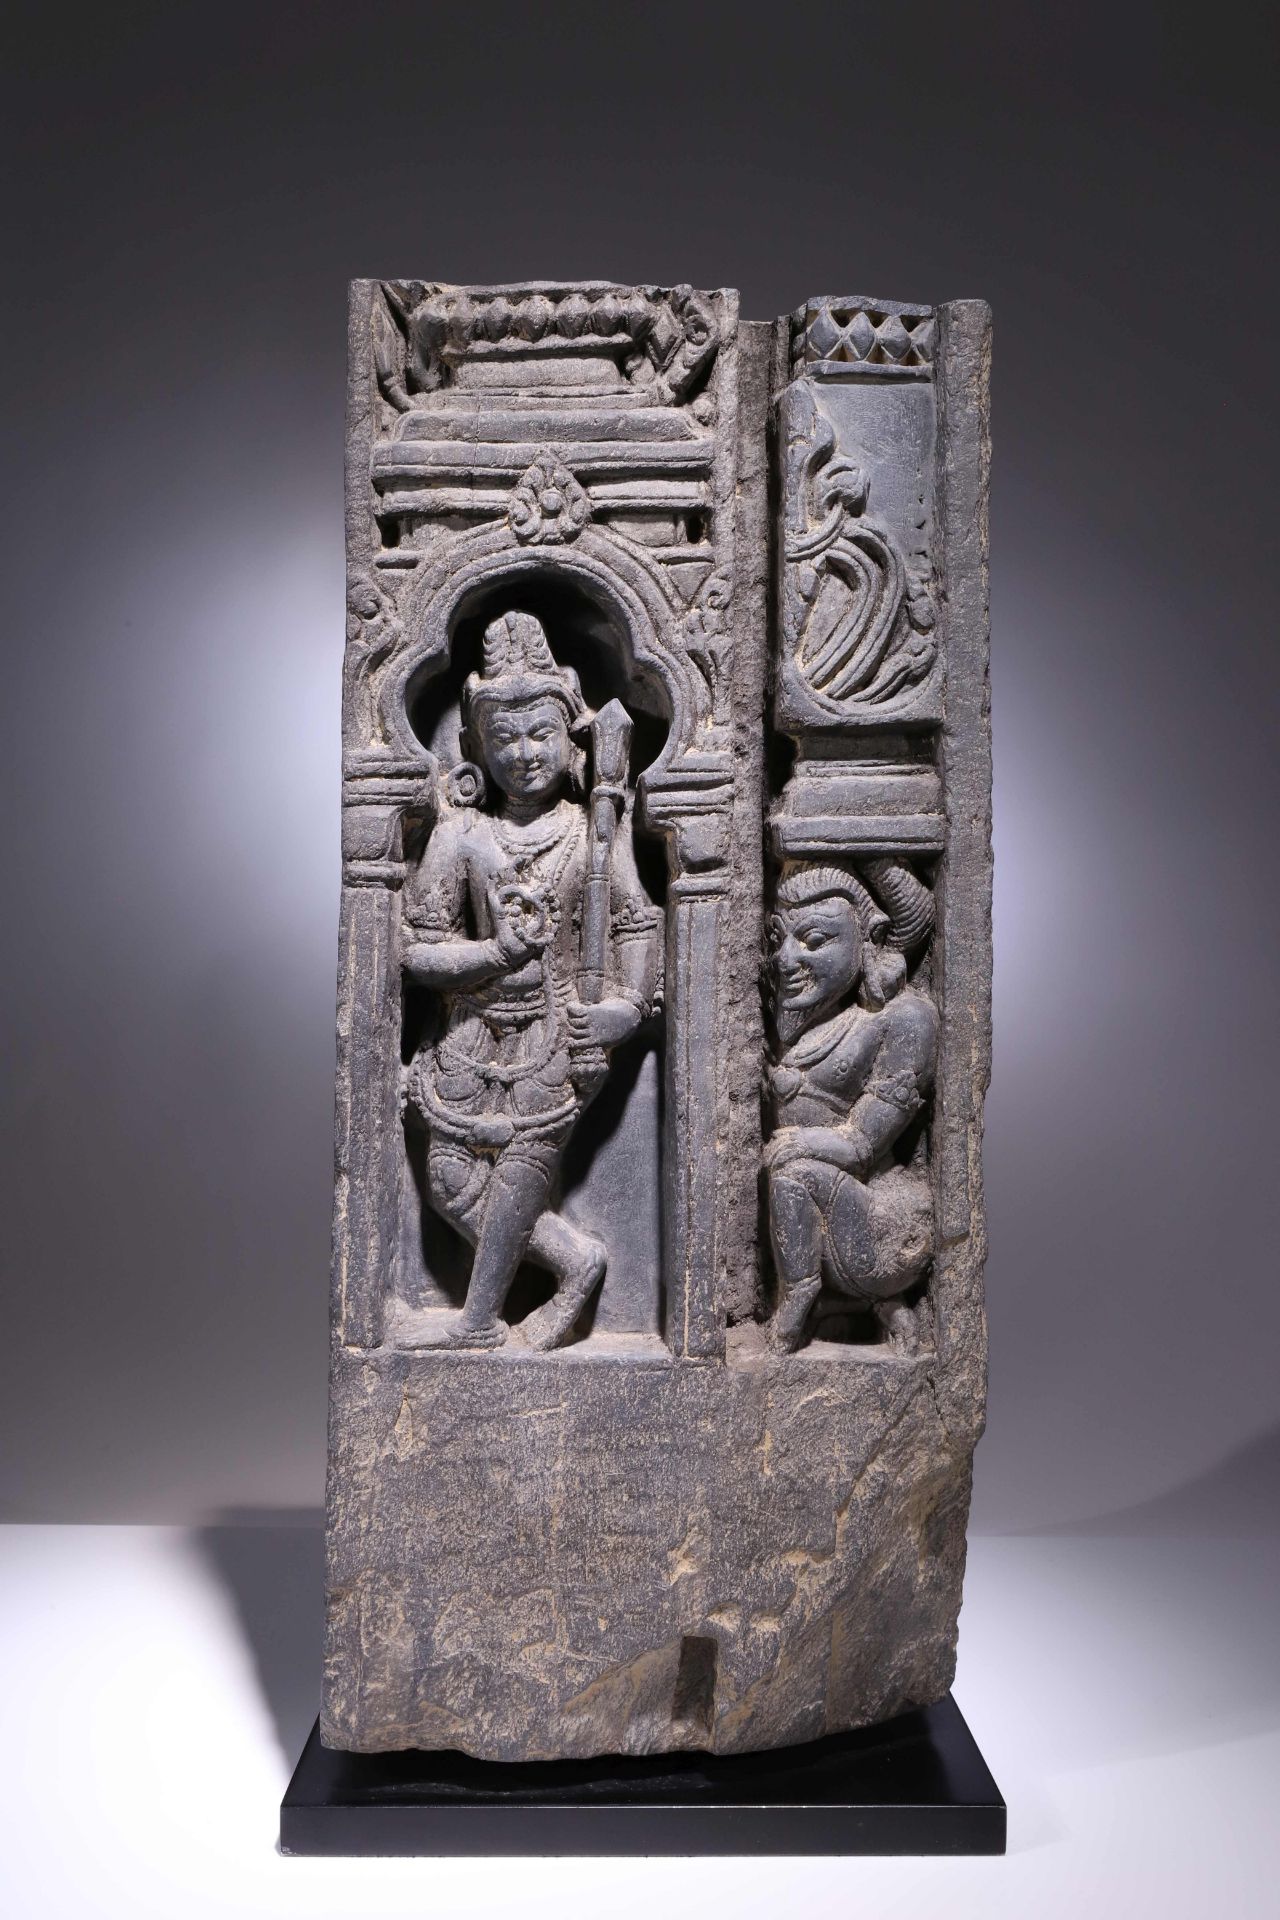 STONE PANEL WITH VARIOUS SCULPTURES - Image 2 of 2